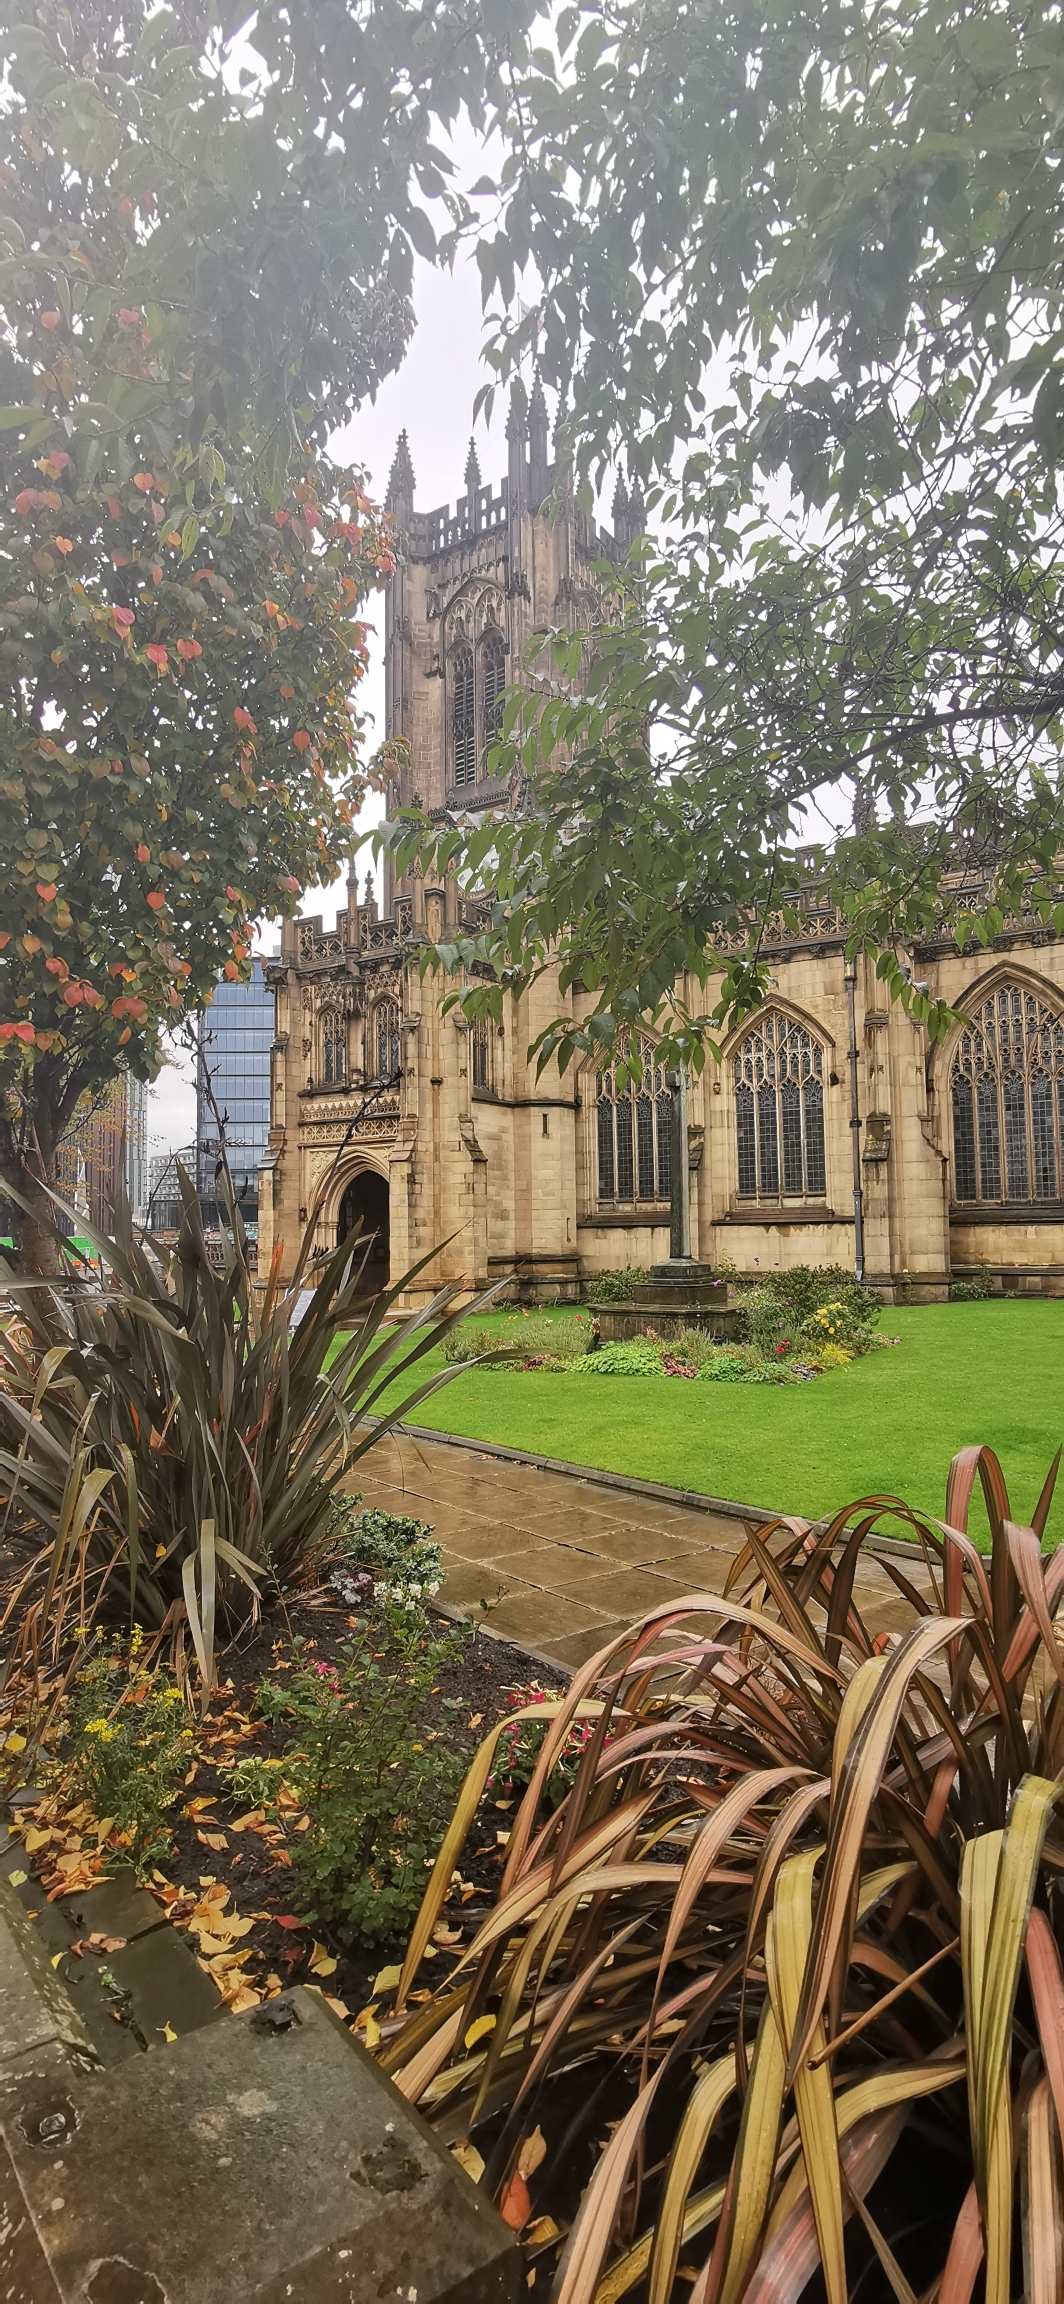 Photo taken between Chetham's School and Cathedral